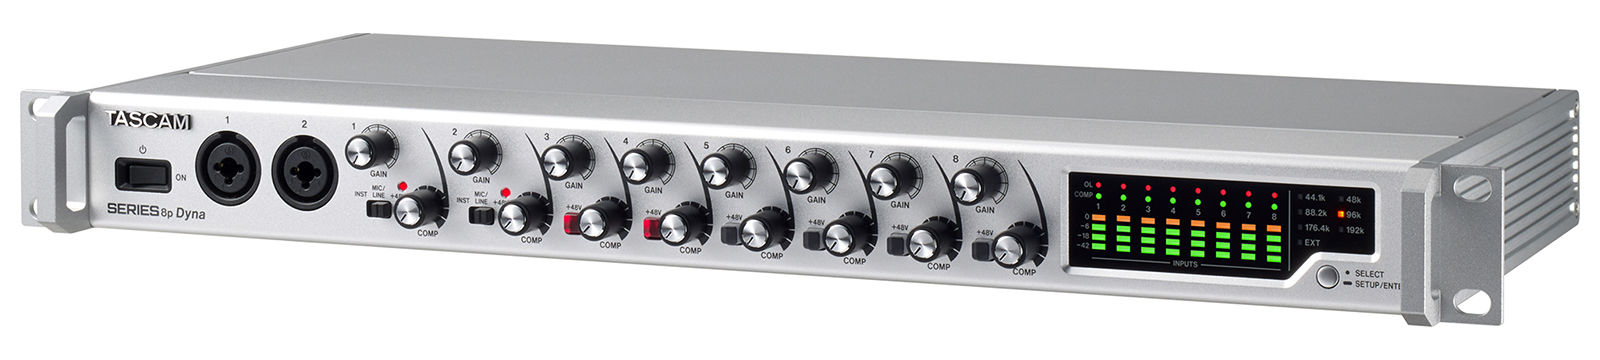 Tascam SERIES 8p Dyna - 8 channel mic preamplifier with analog compressor